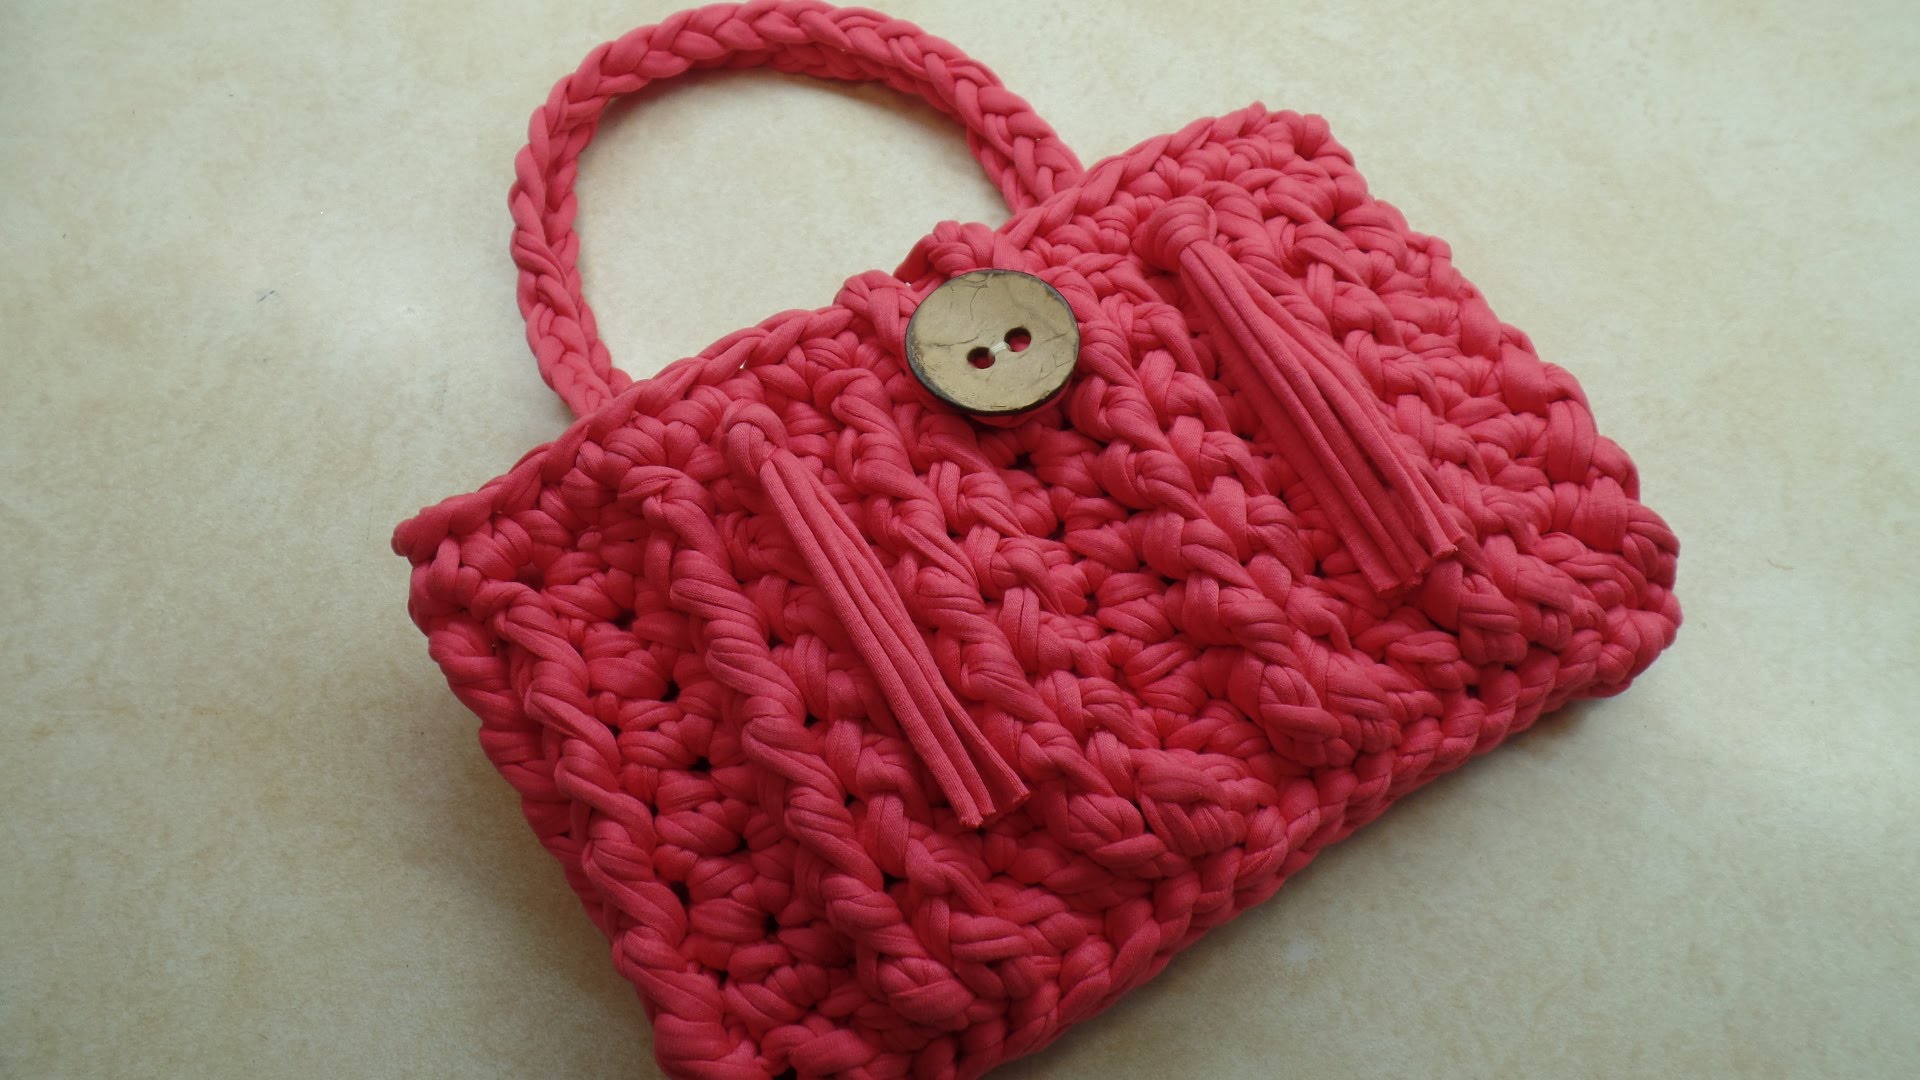 CROCHET How To #Crochet T Shirt Yarn Bag Purse Featuring Wool and ...